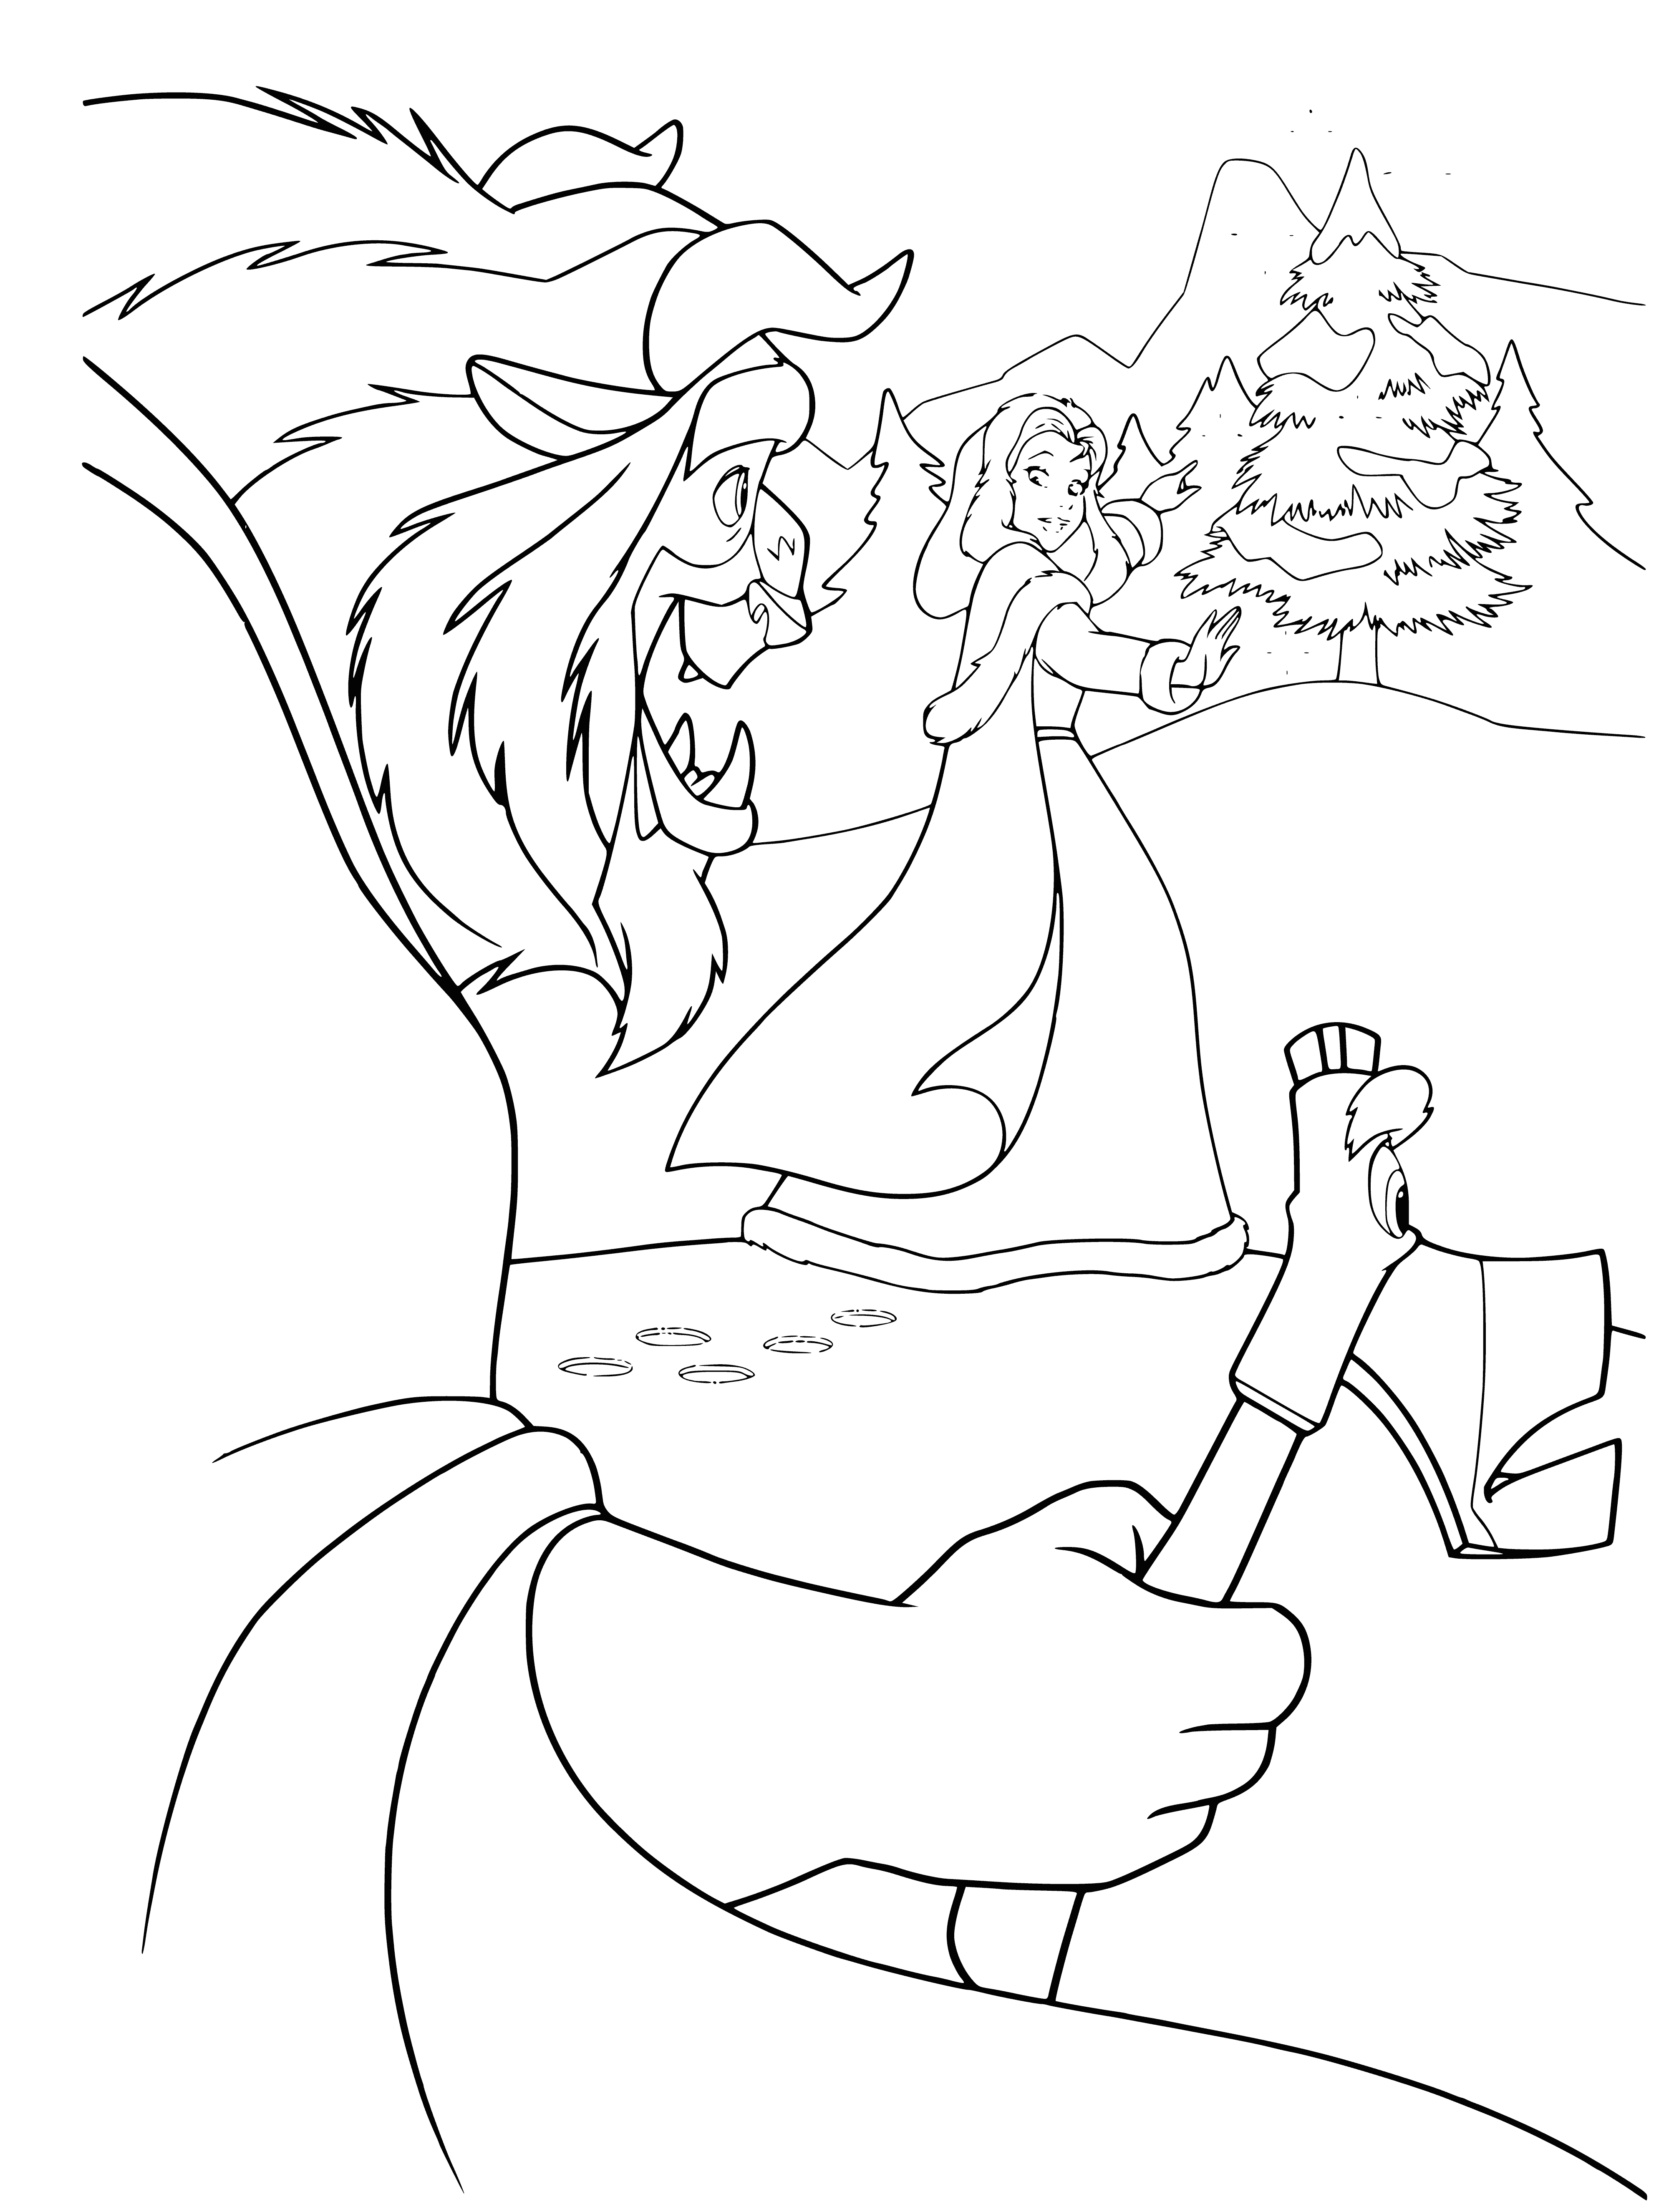 coloring page: Disney princesses gather 'round winter tree in the forest and welcome the New Year with party hats, noisemakers & sparklers. Snow White and Aurora, Cinderella and Belle, Jasmine chat & laugh as snowflakes fall from the sky.